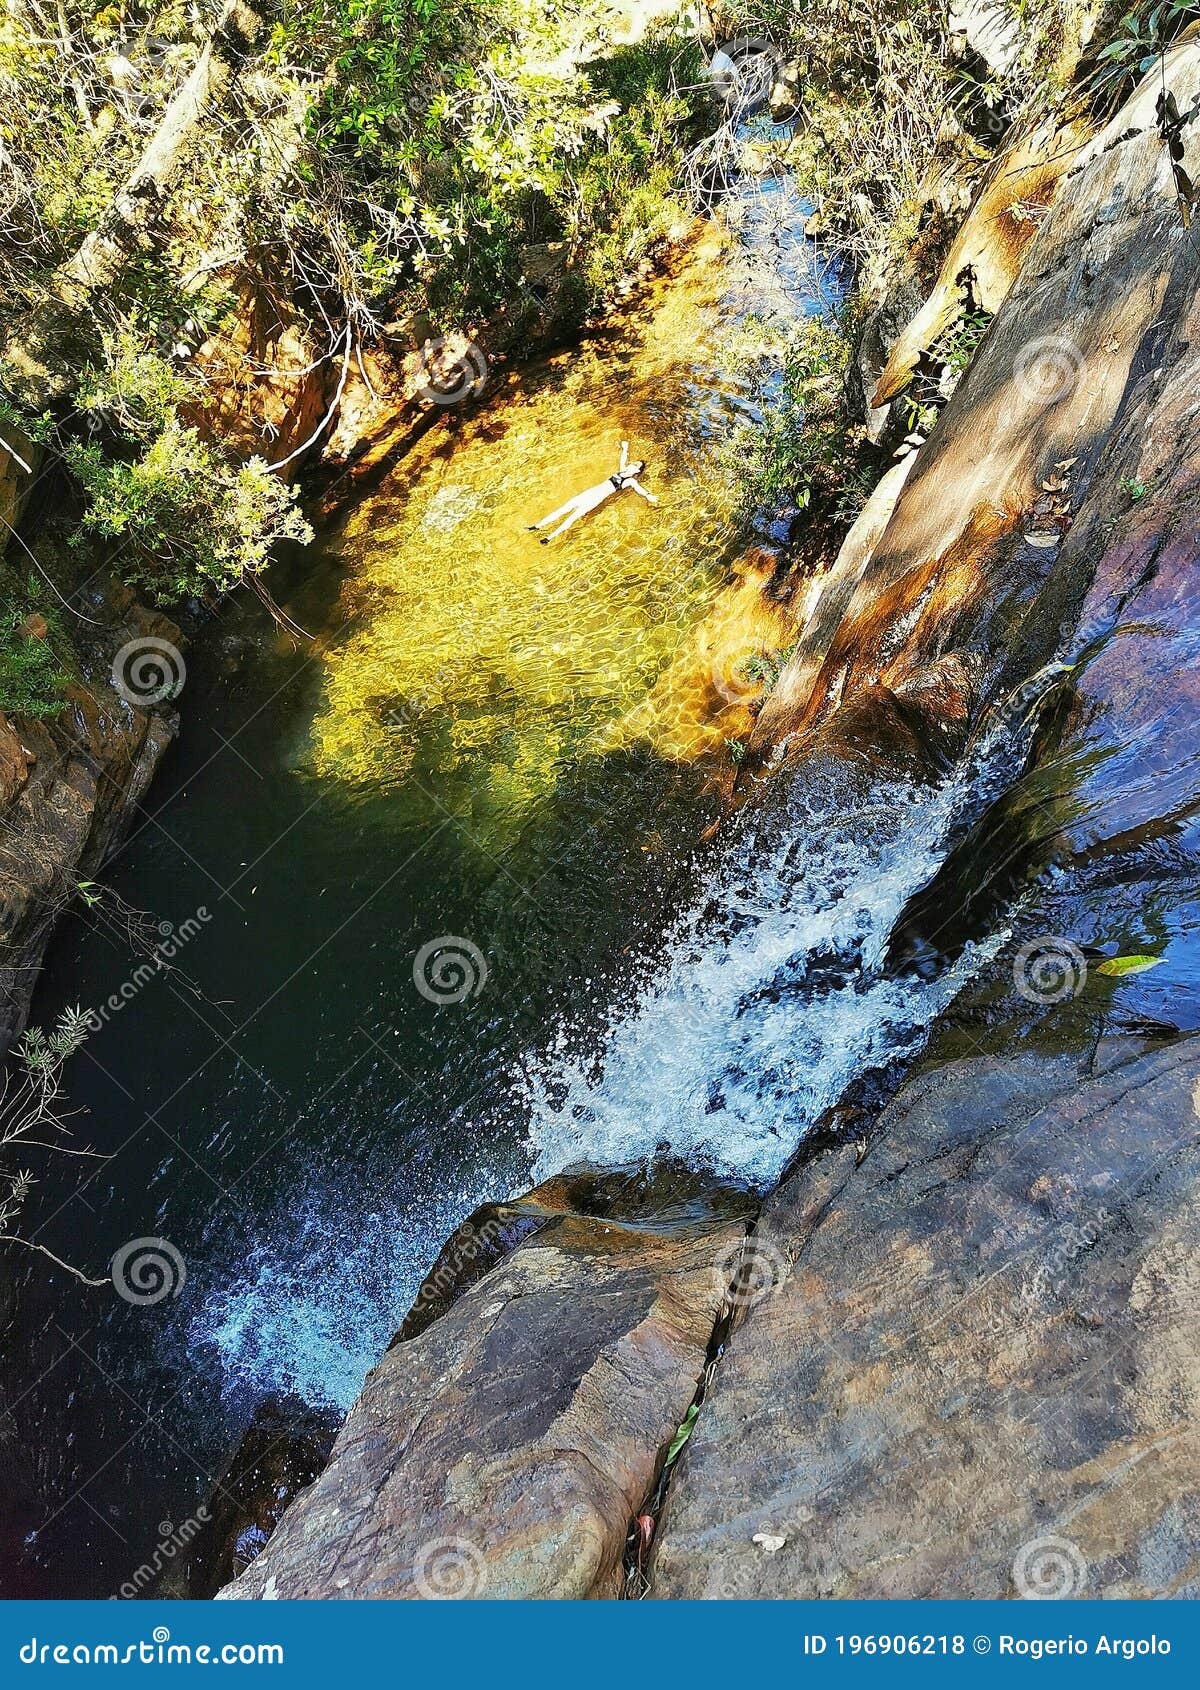 woman floating in water at waterfall cruzados at acuruÃÂ­, minas gerais, brazil